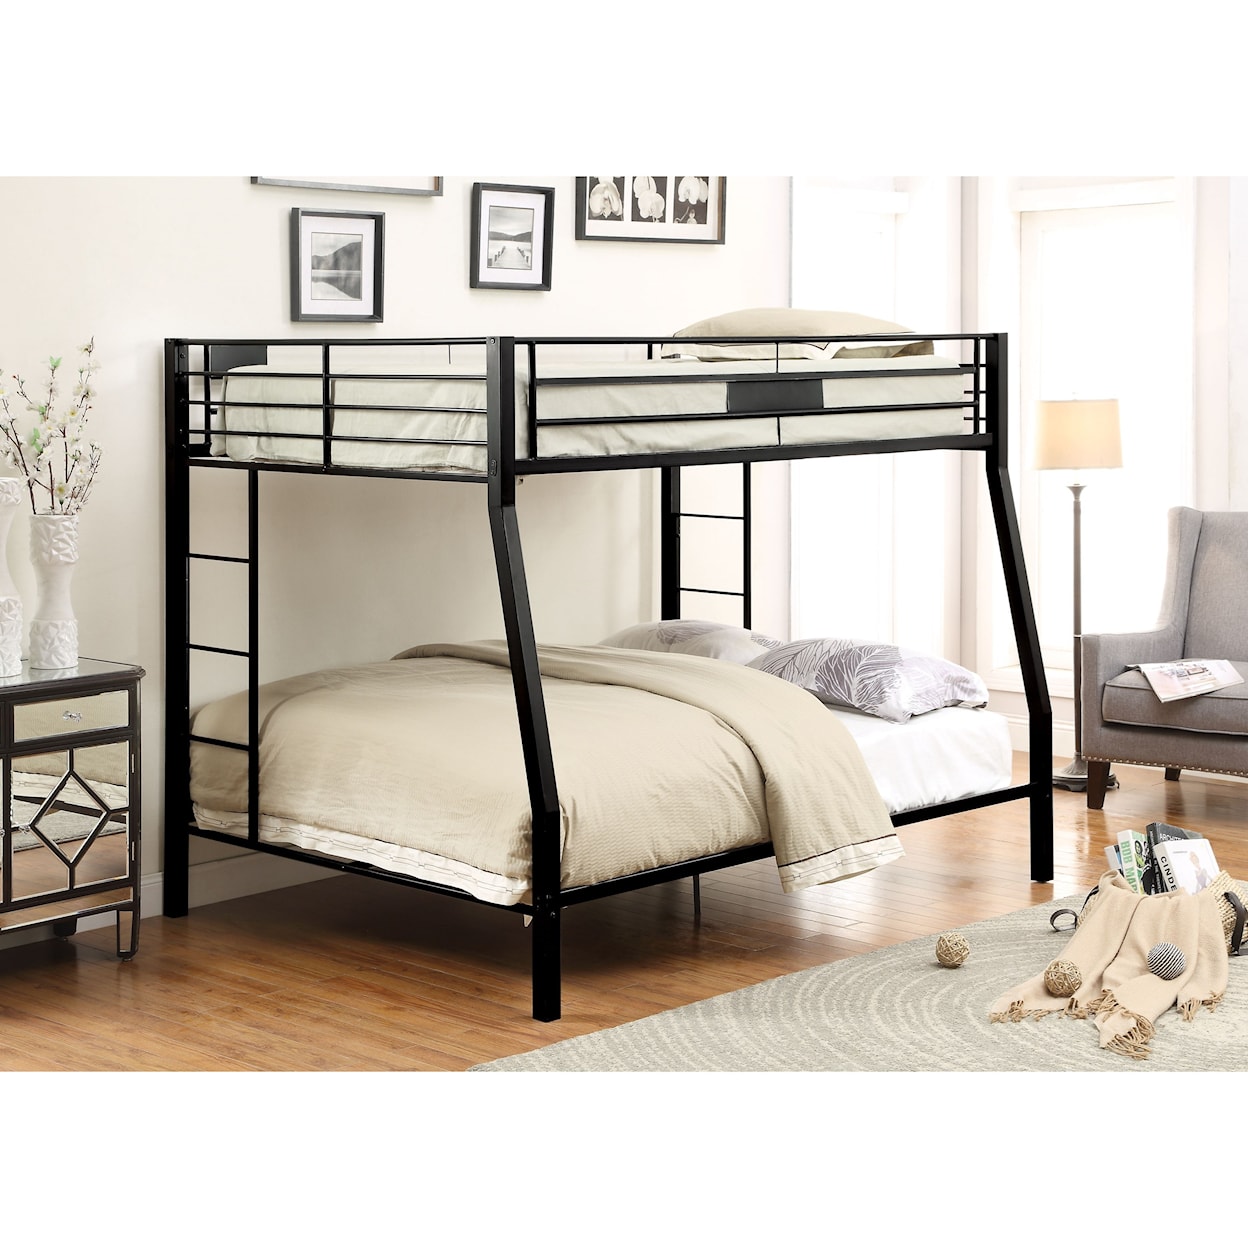 Acme Furniture Limbra Full XL Over Queen Bunk Bed